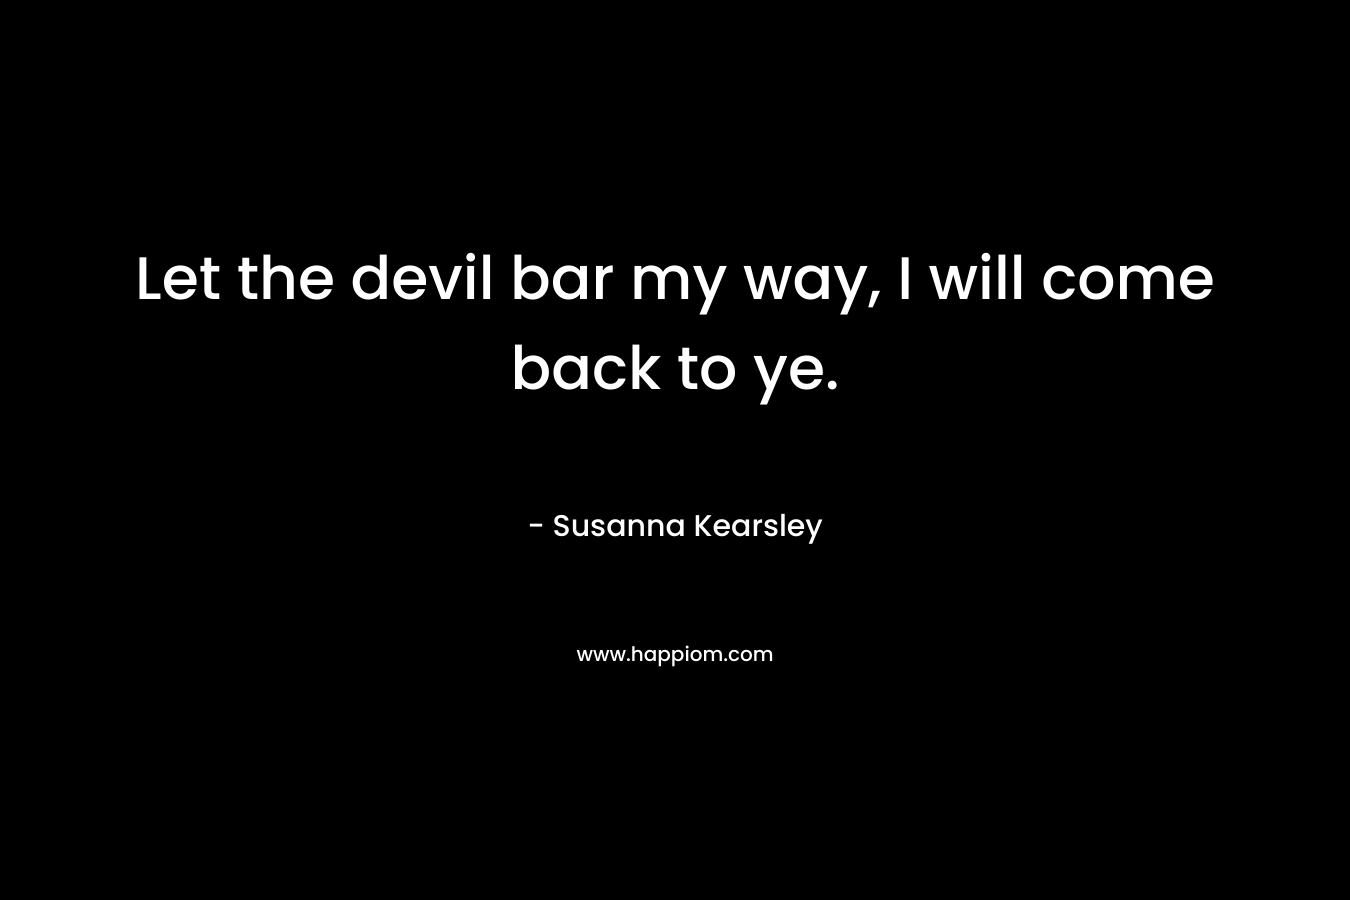 Let the devil bar my way, I will come back to ye. – Susanna Kearsley